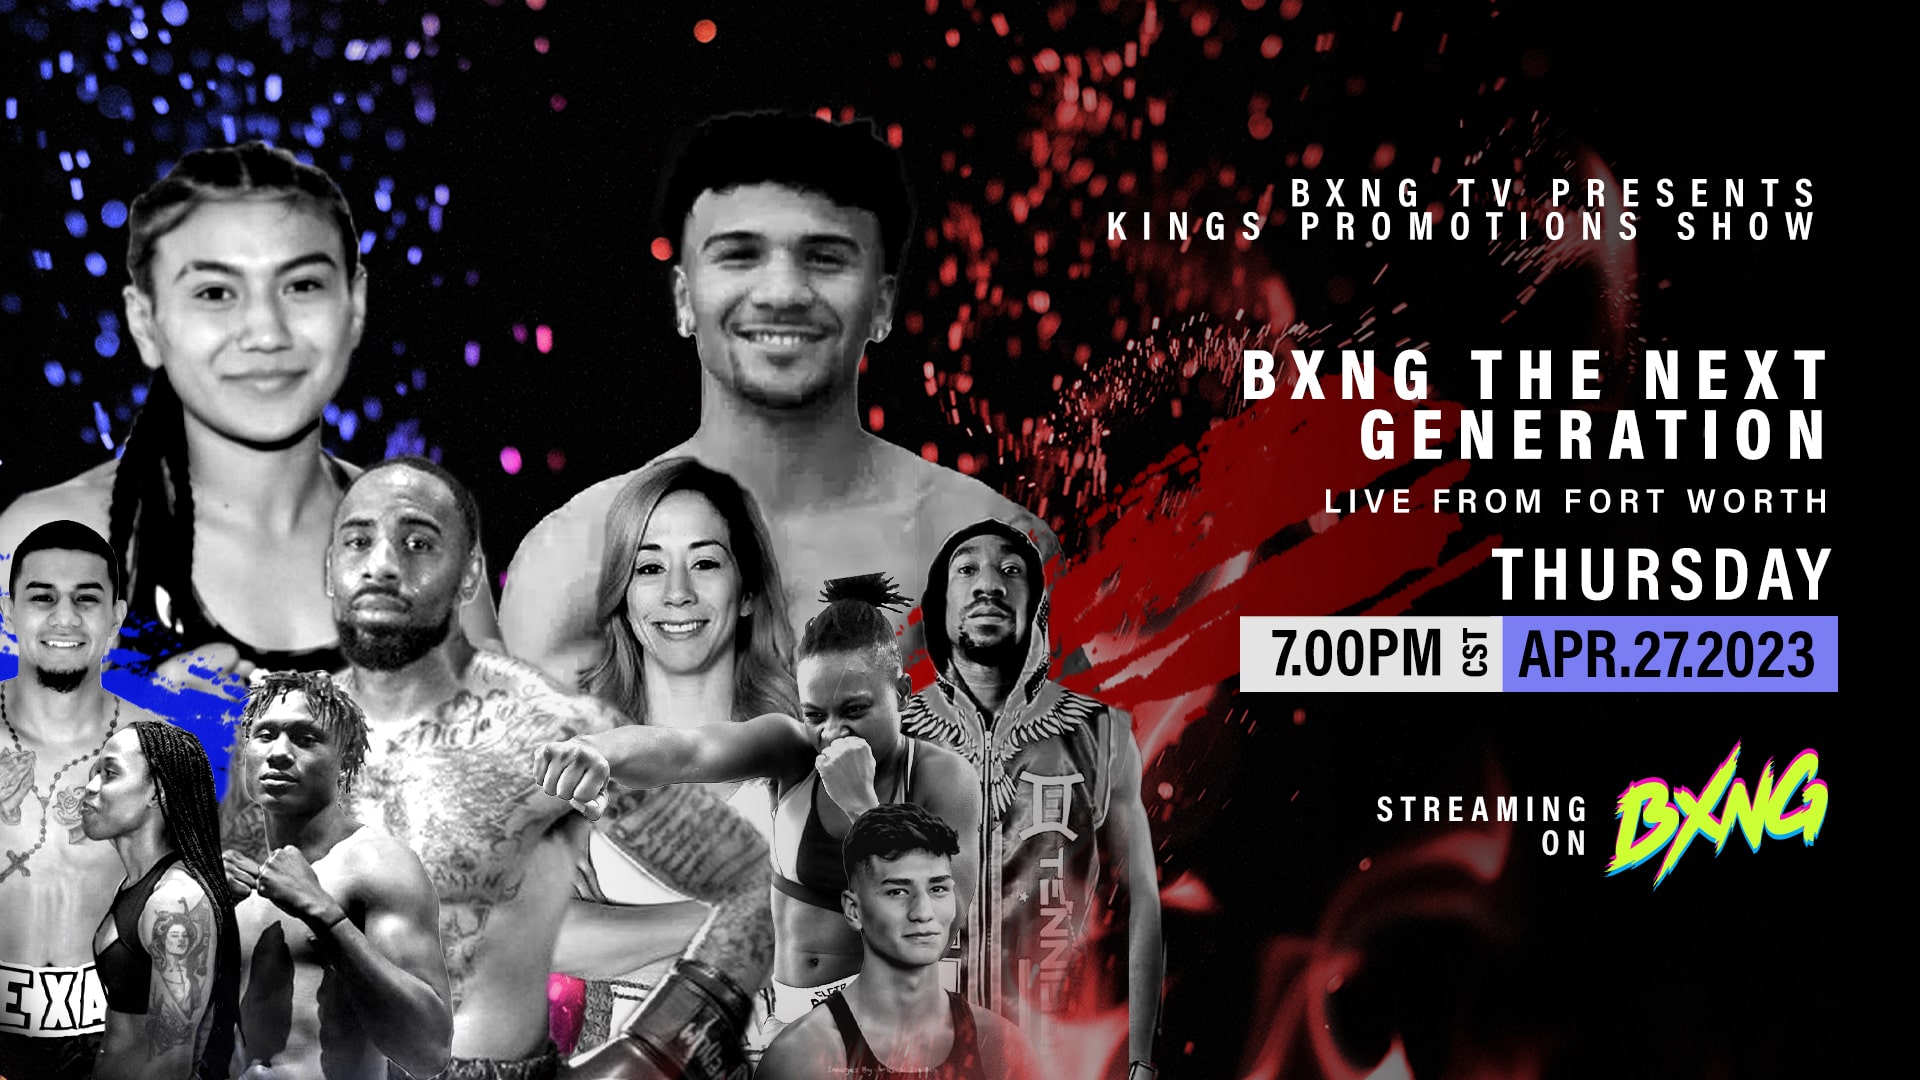 BXNG TV Presents Kings Promotions Show Live Stream 04/27/23